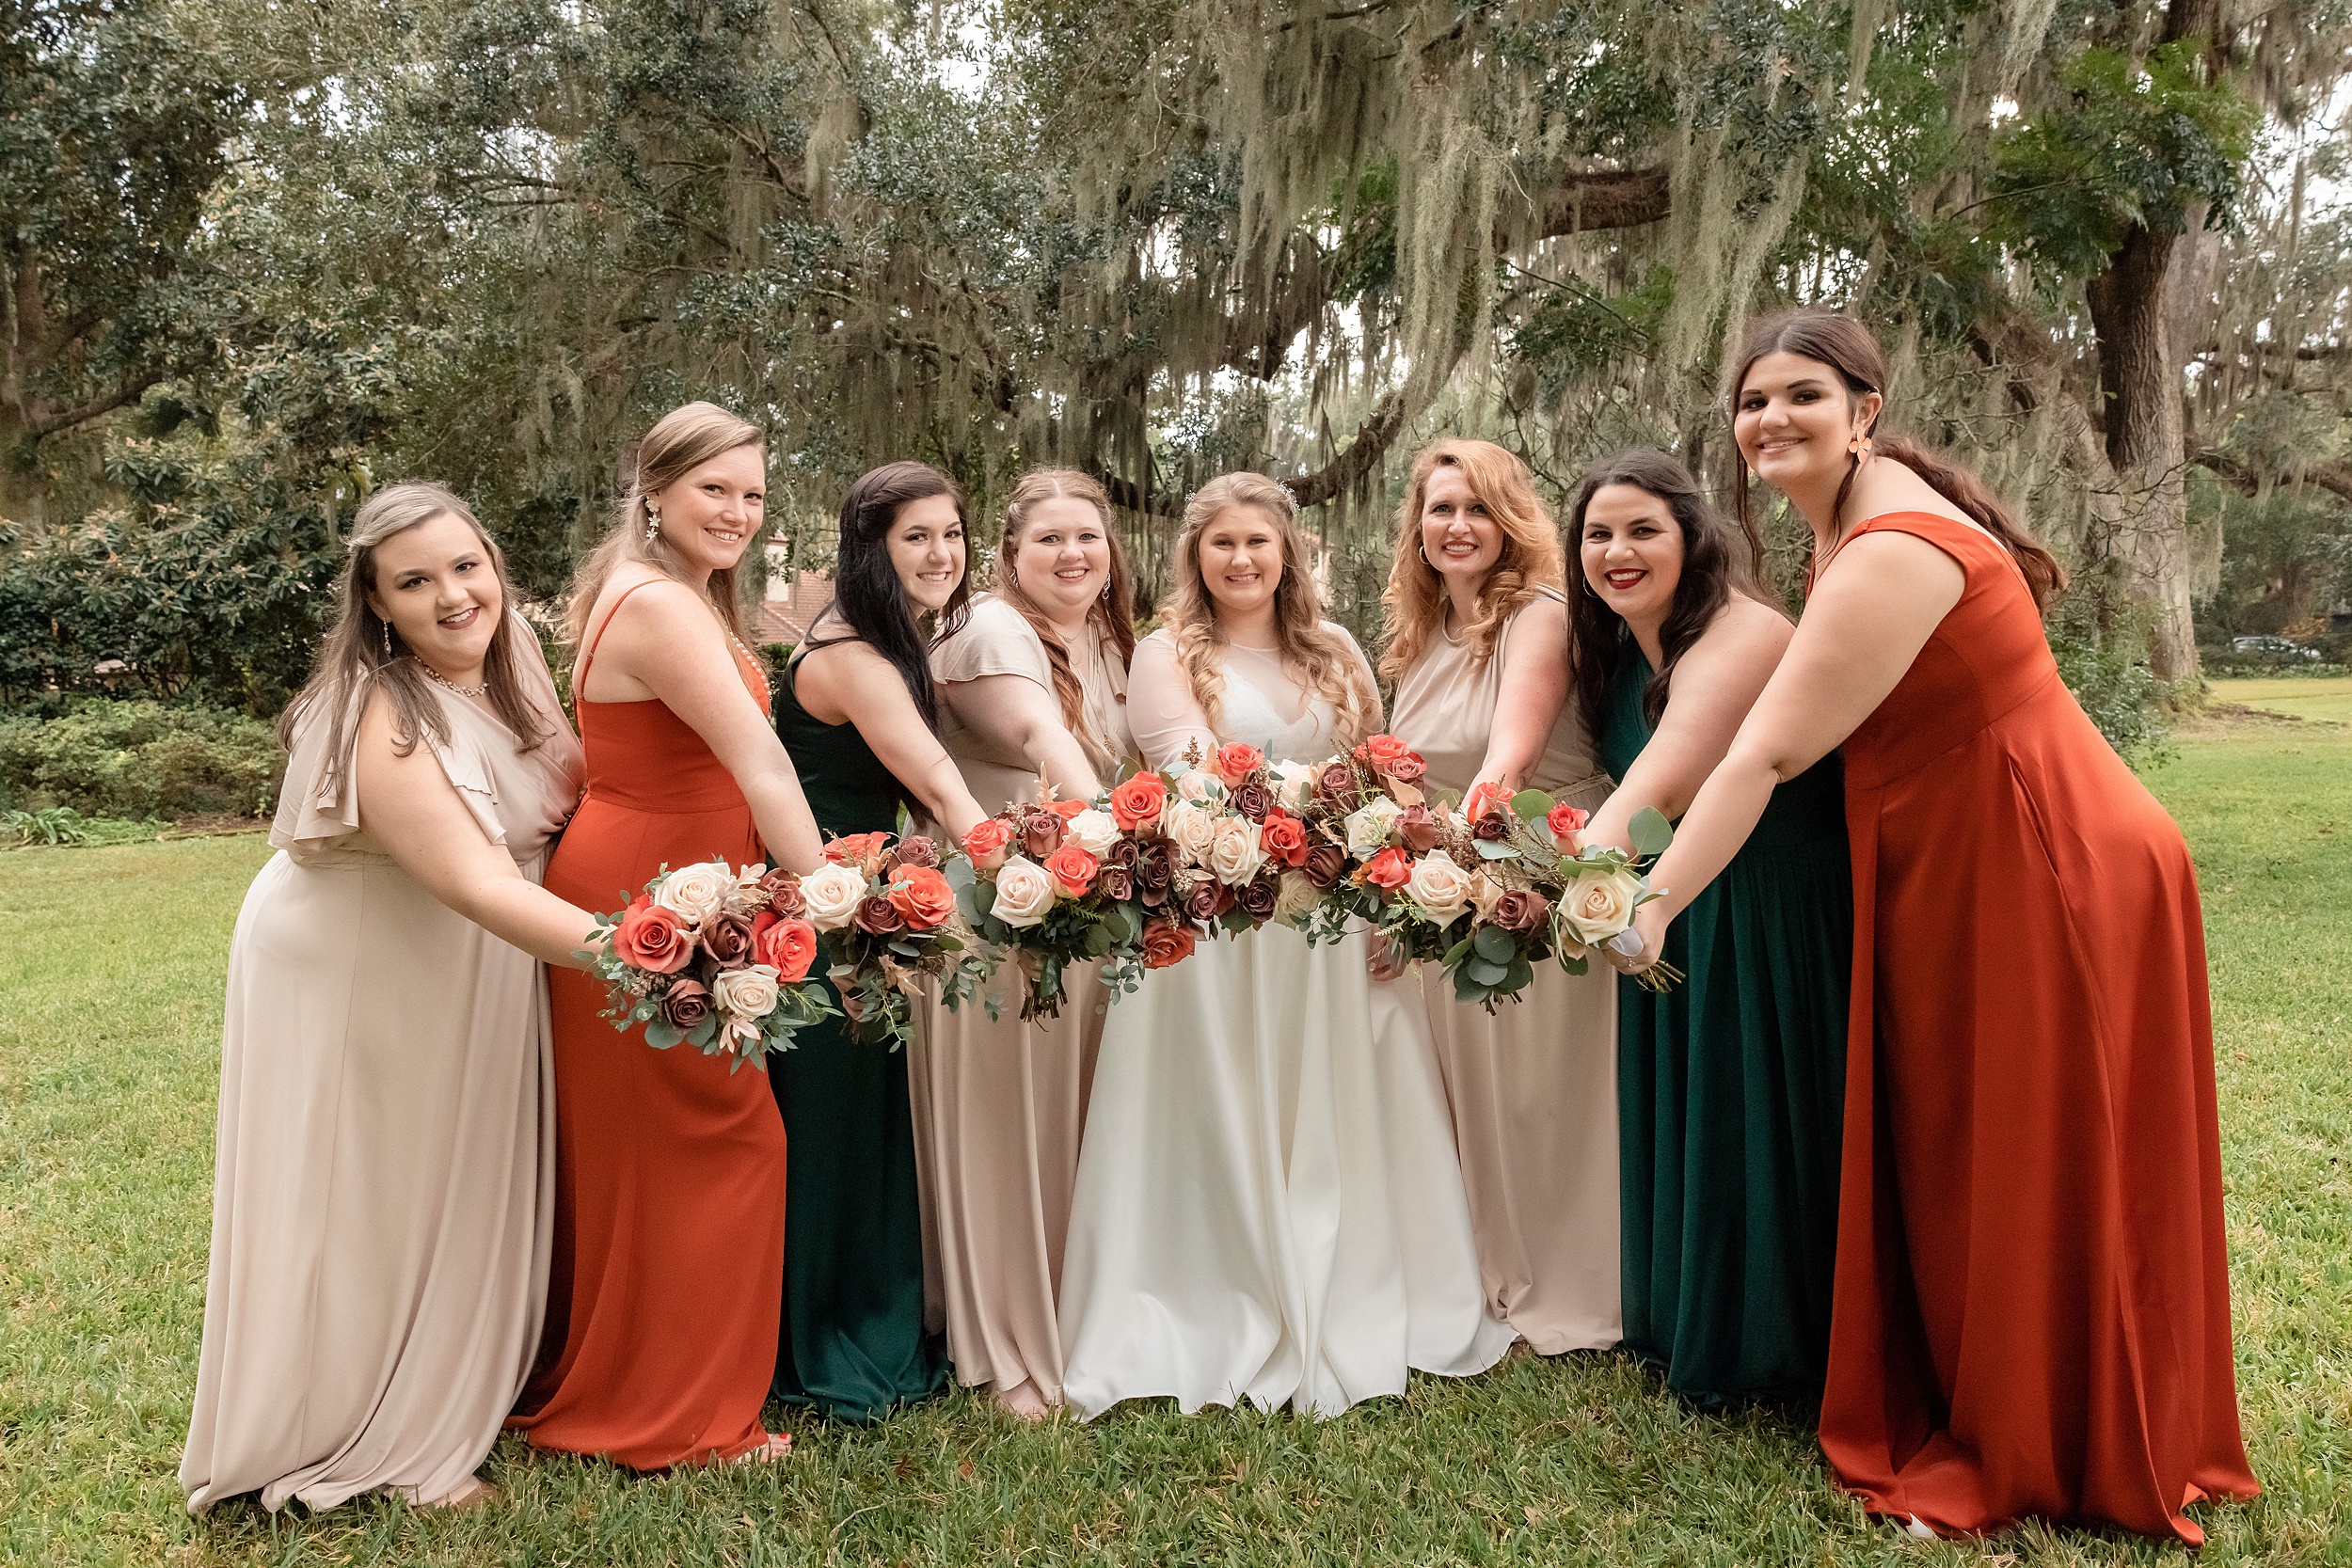 A bride shows off her bouquet with her bridesmaids